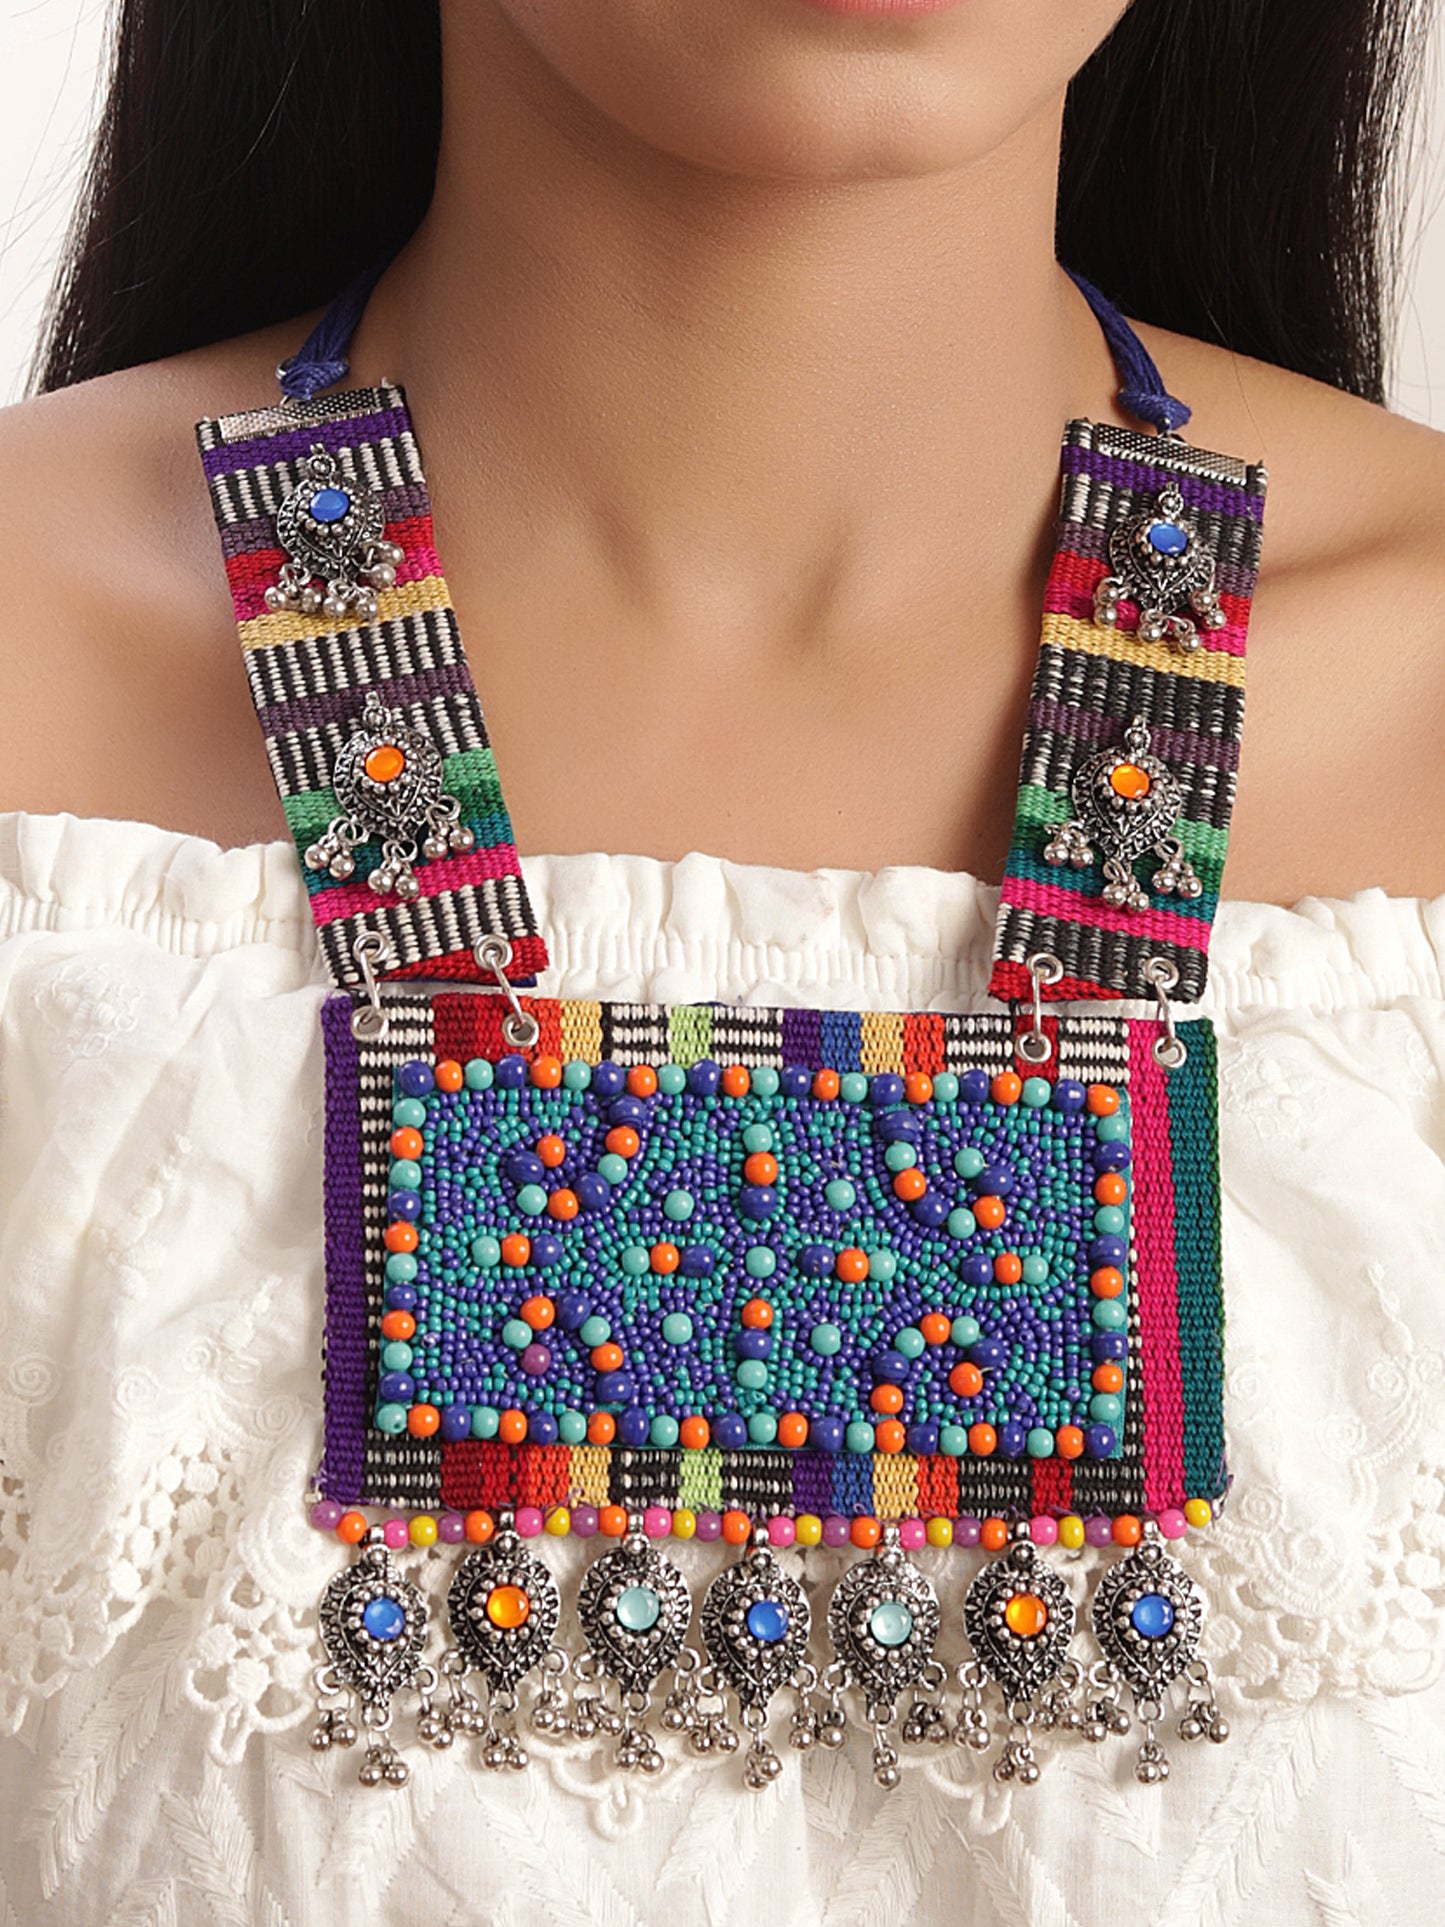 The Boho Pixelated Necklace in Shades of Blue